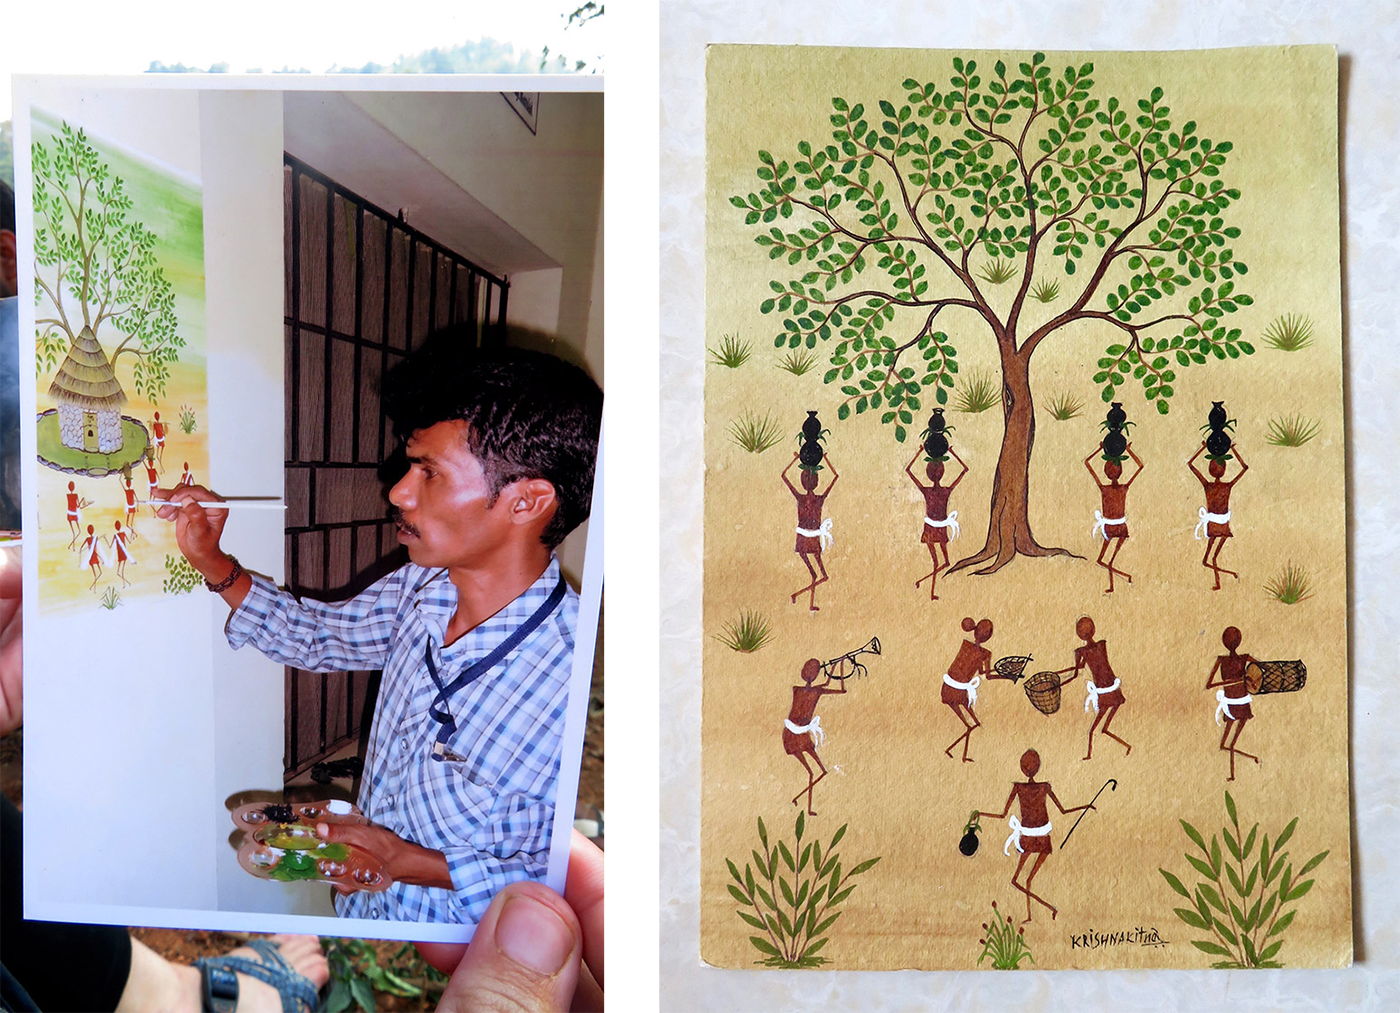 
Left: A photograph of a photo of Krishna while painting. Right: One of his completed artworks